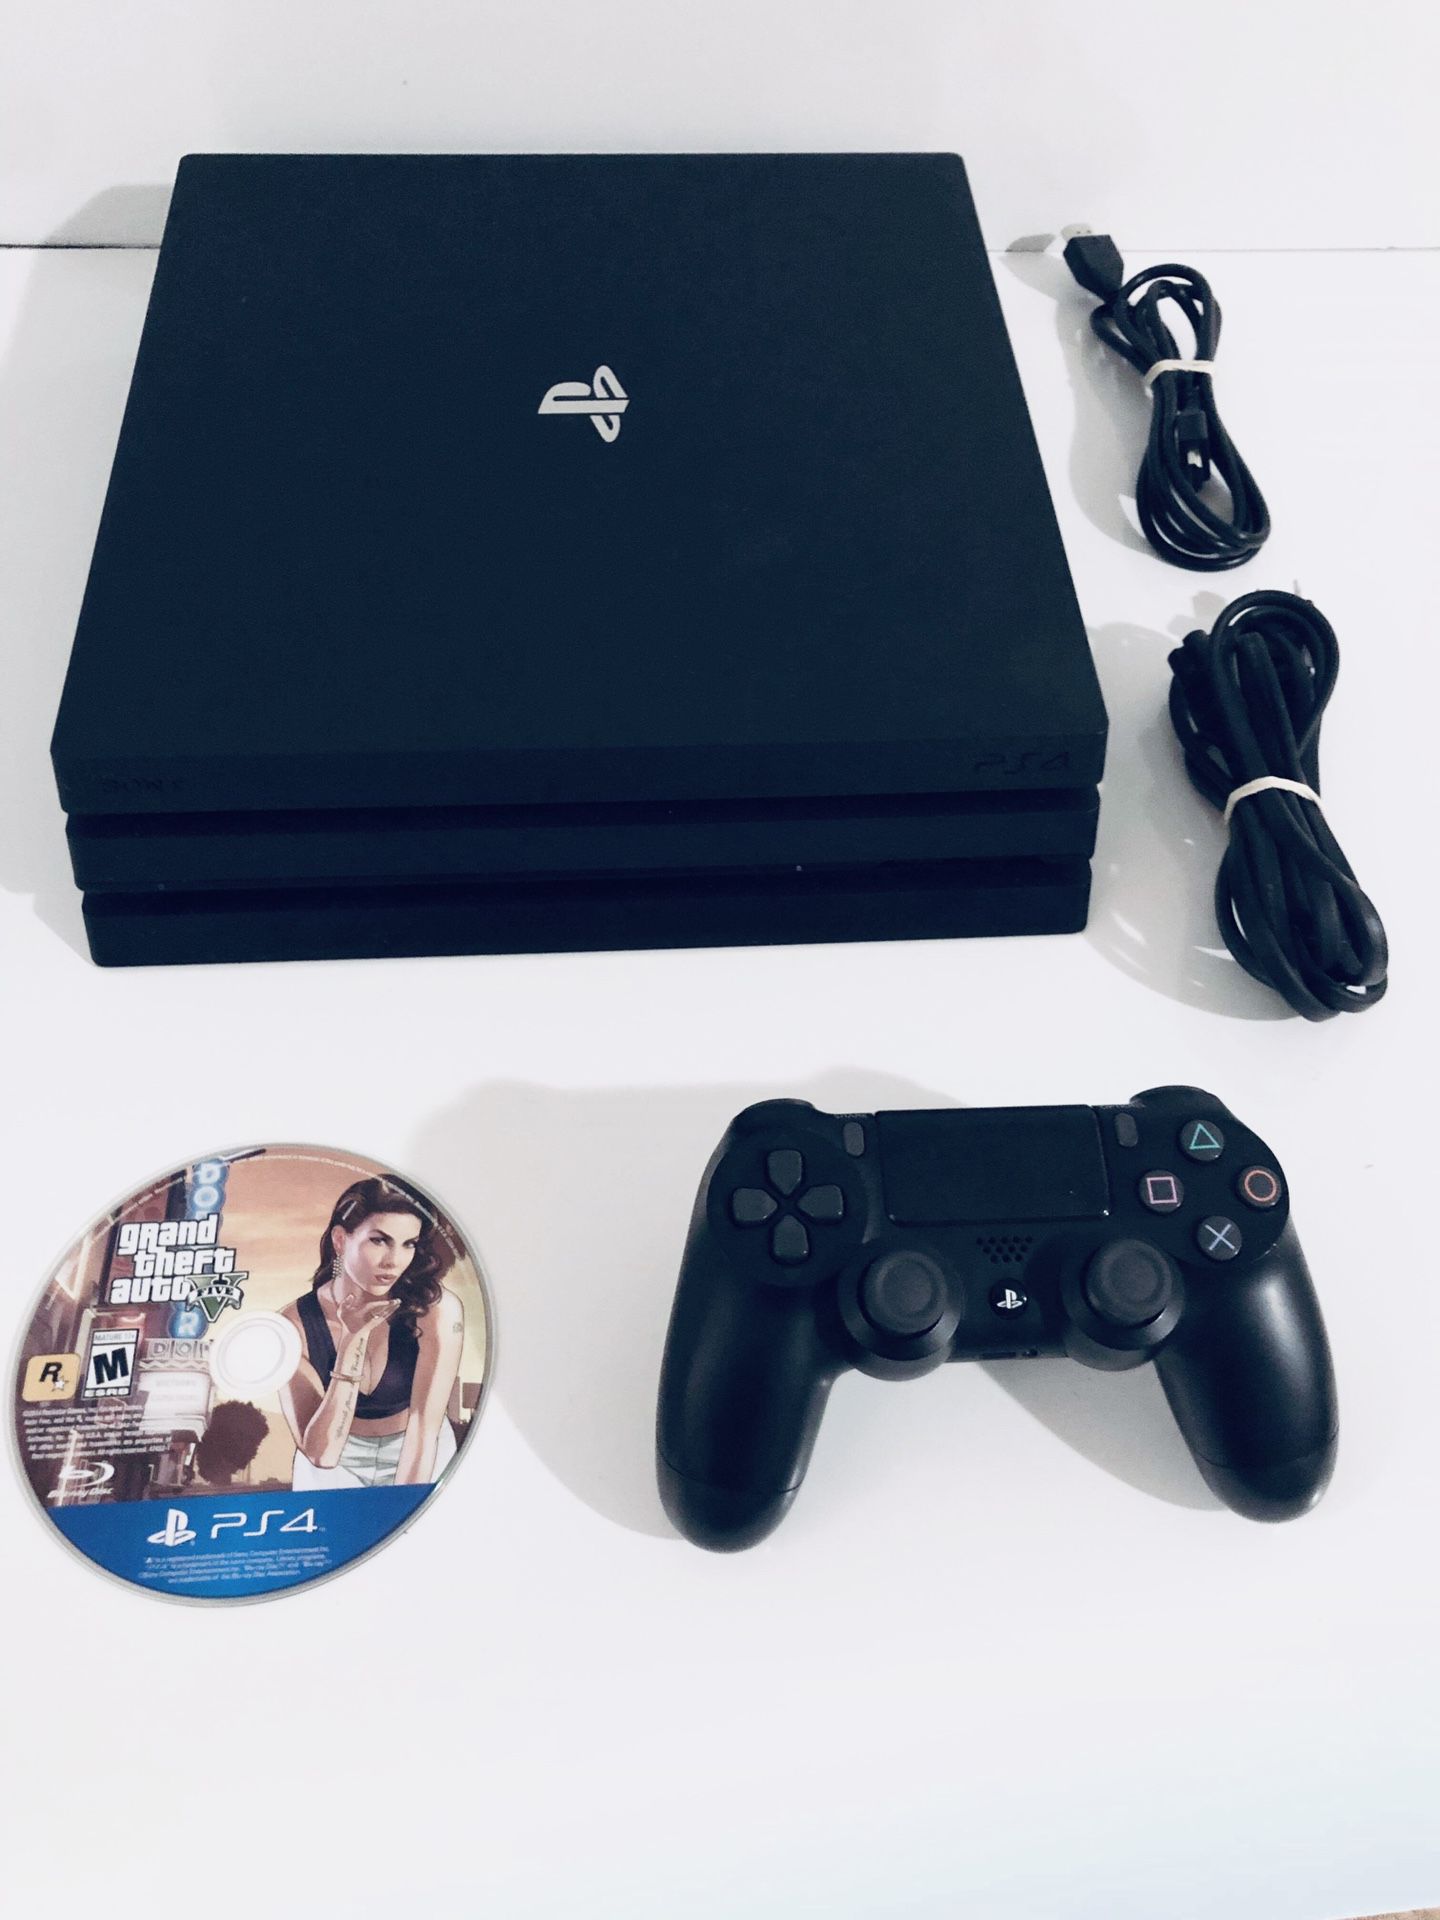 Ps4 PlayStation 4 Pro 4k W GTA V & Black Controller in MIN CONDITION